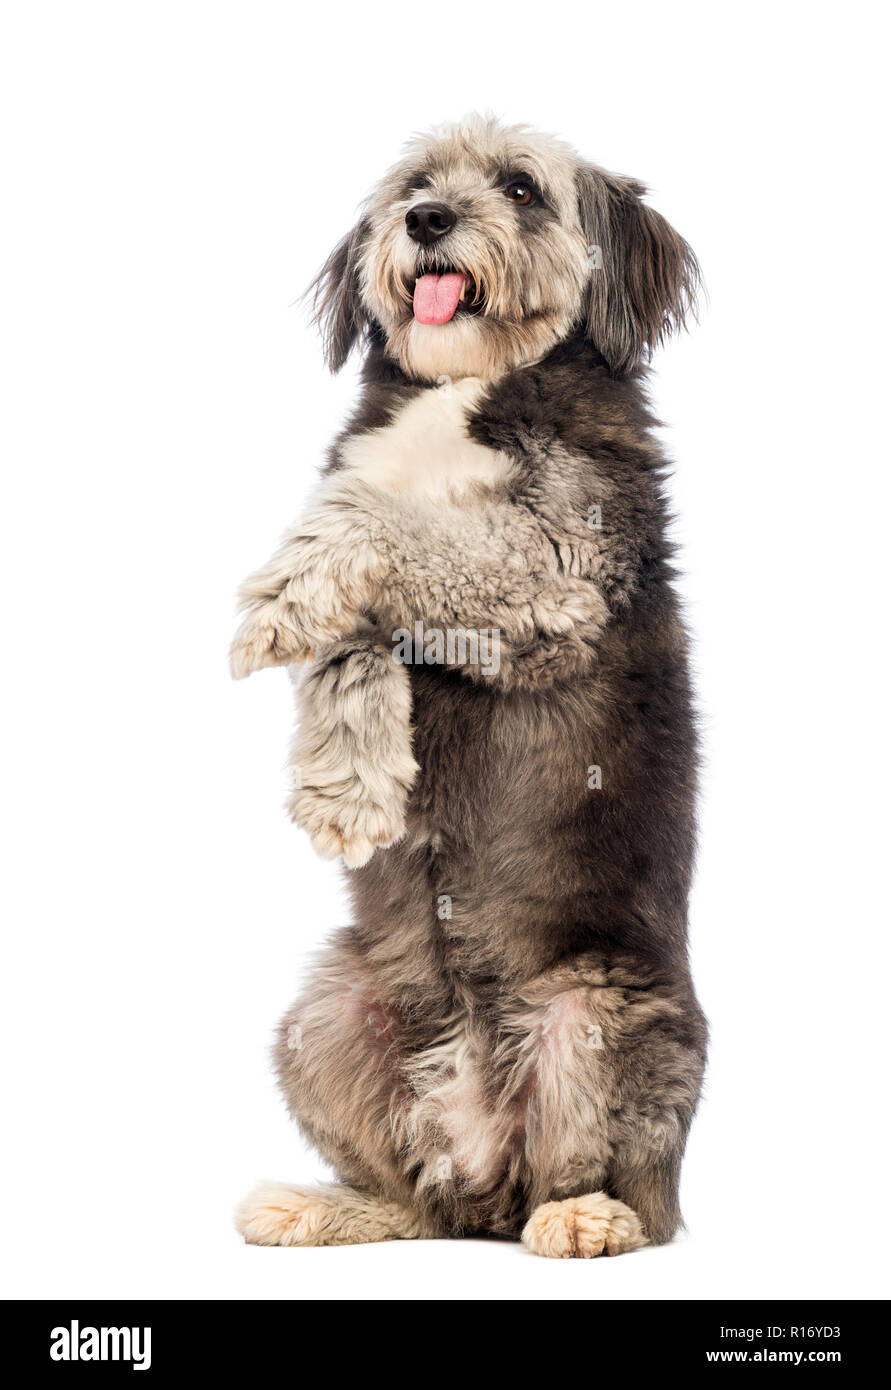 Crossbreed, 4 years old, standing on hind legs, panting and looking up in front of white background Stock Photo